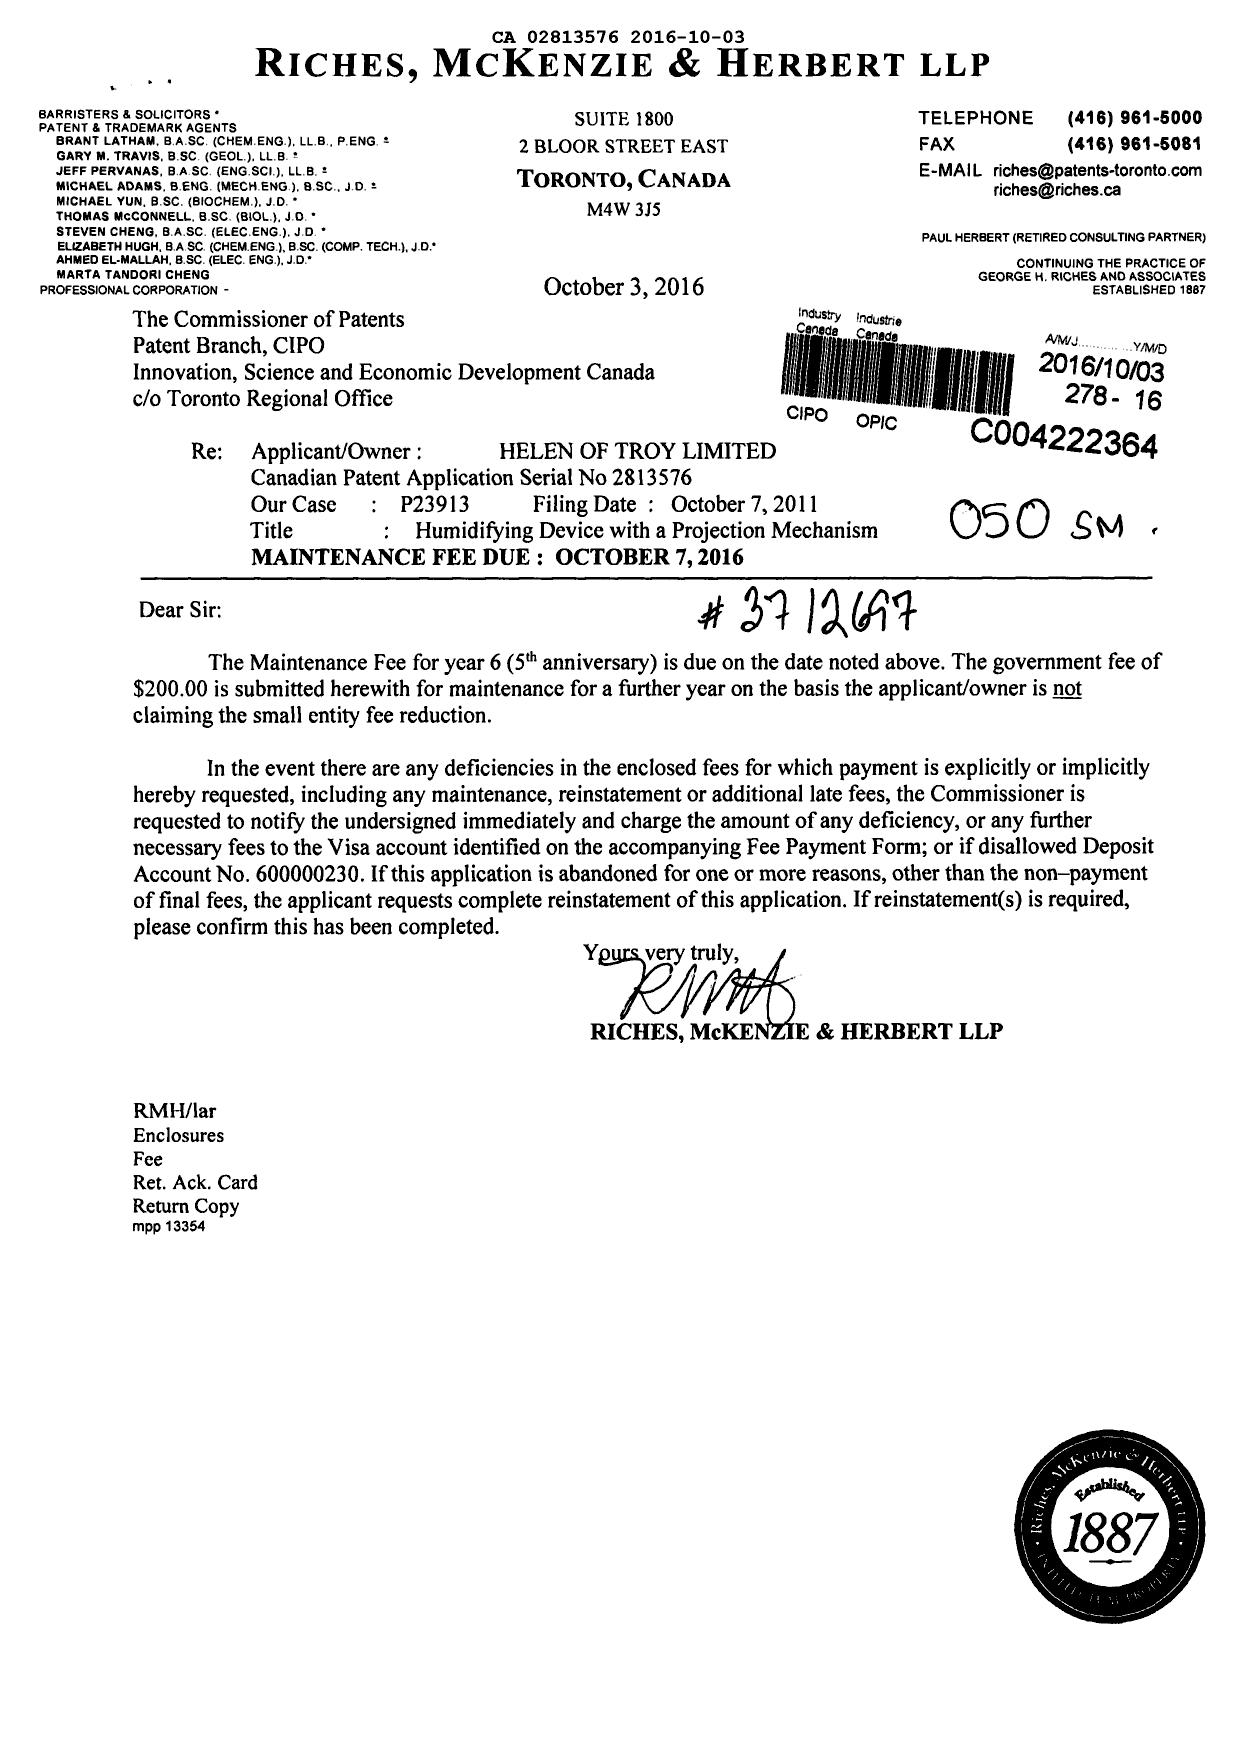 Canadian Patent Document 2813576. Fees 20151203. Image 1 of 1